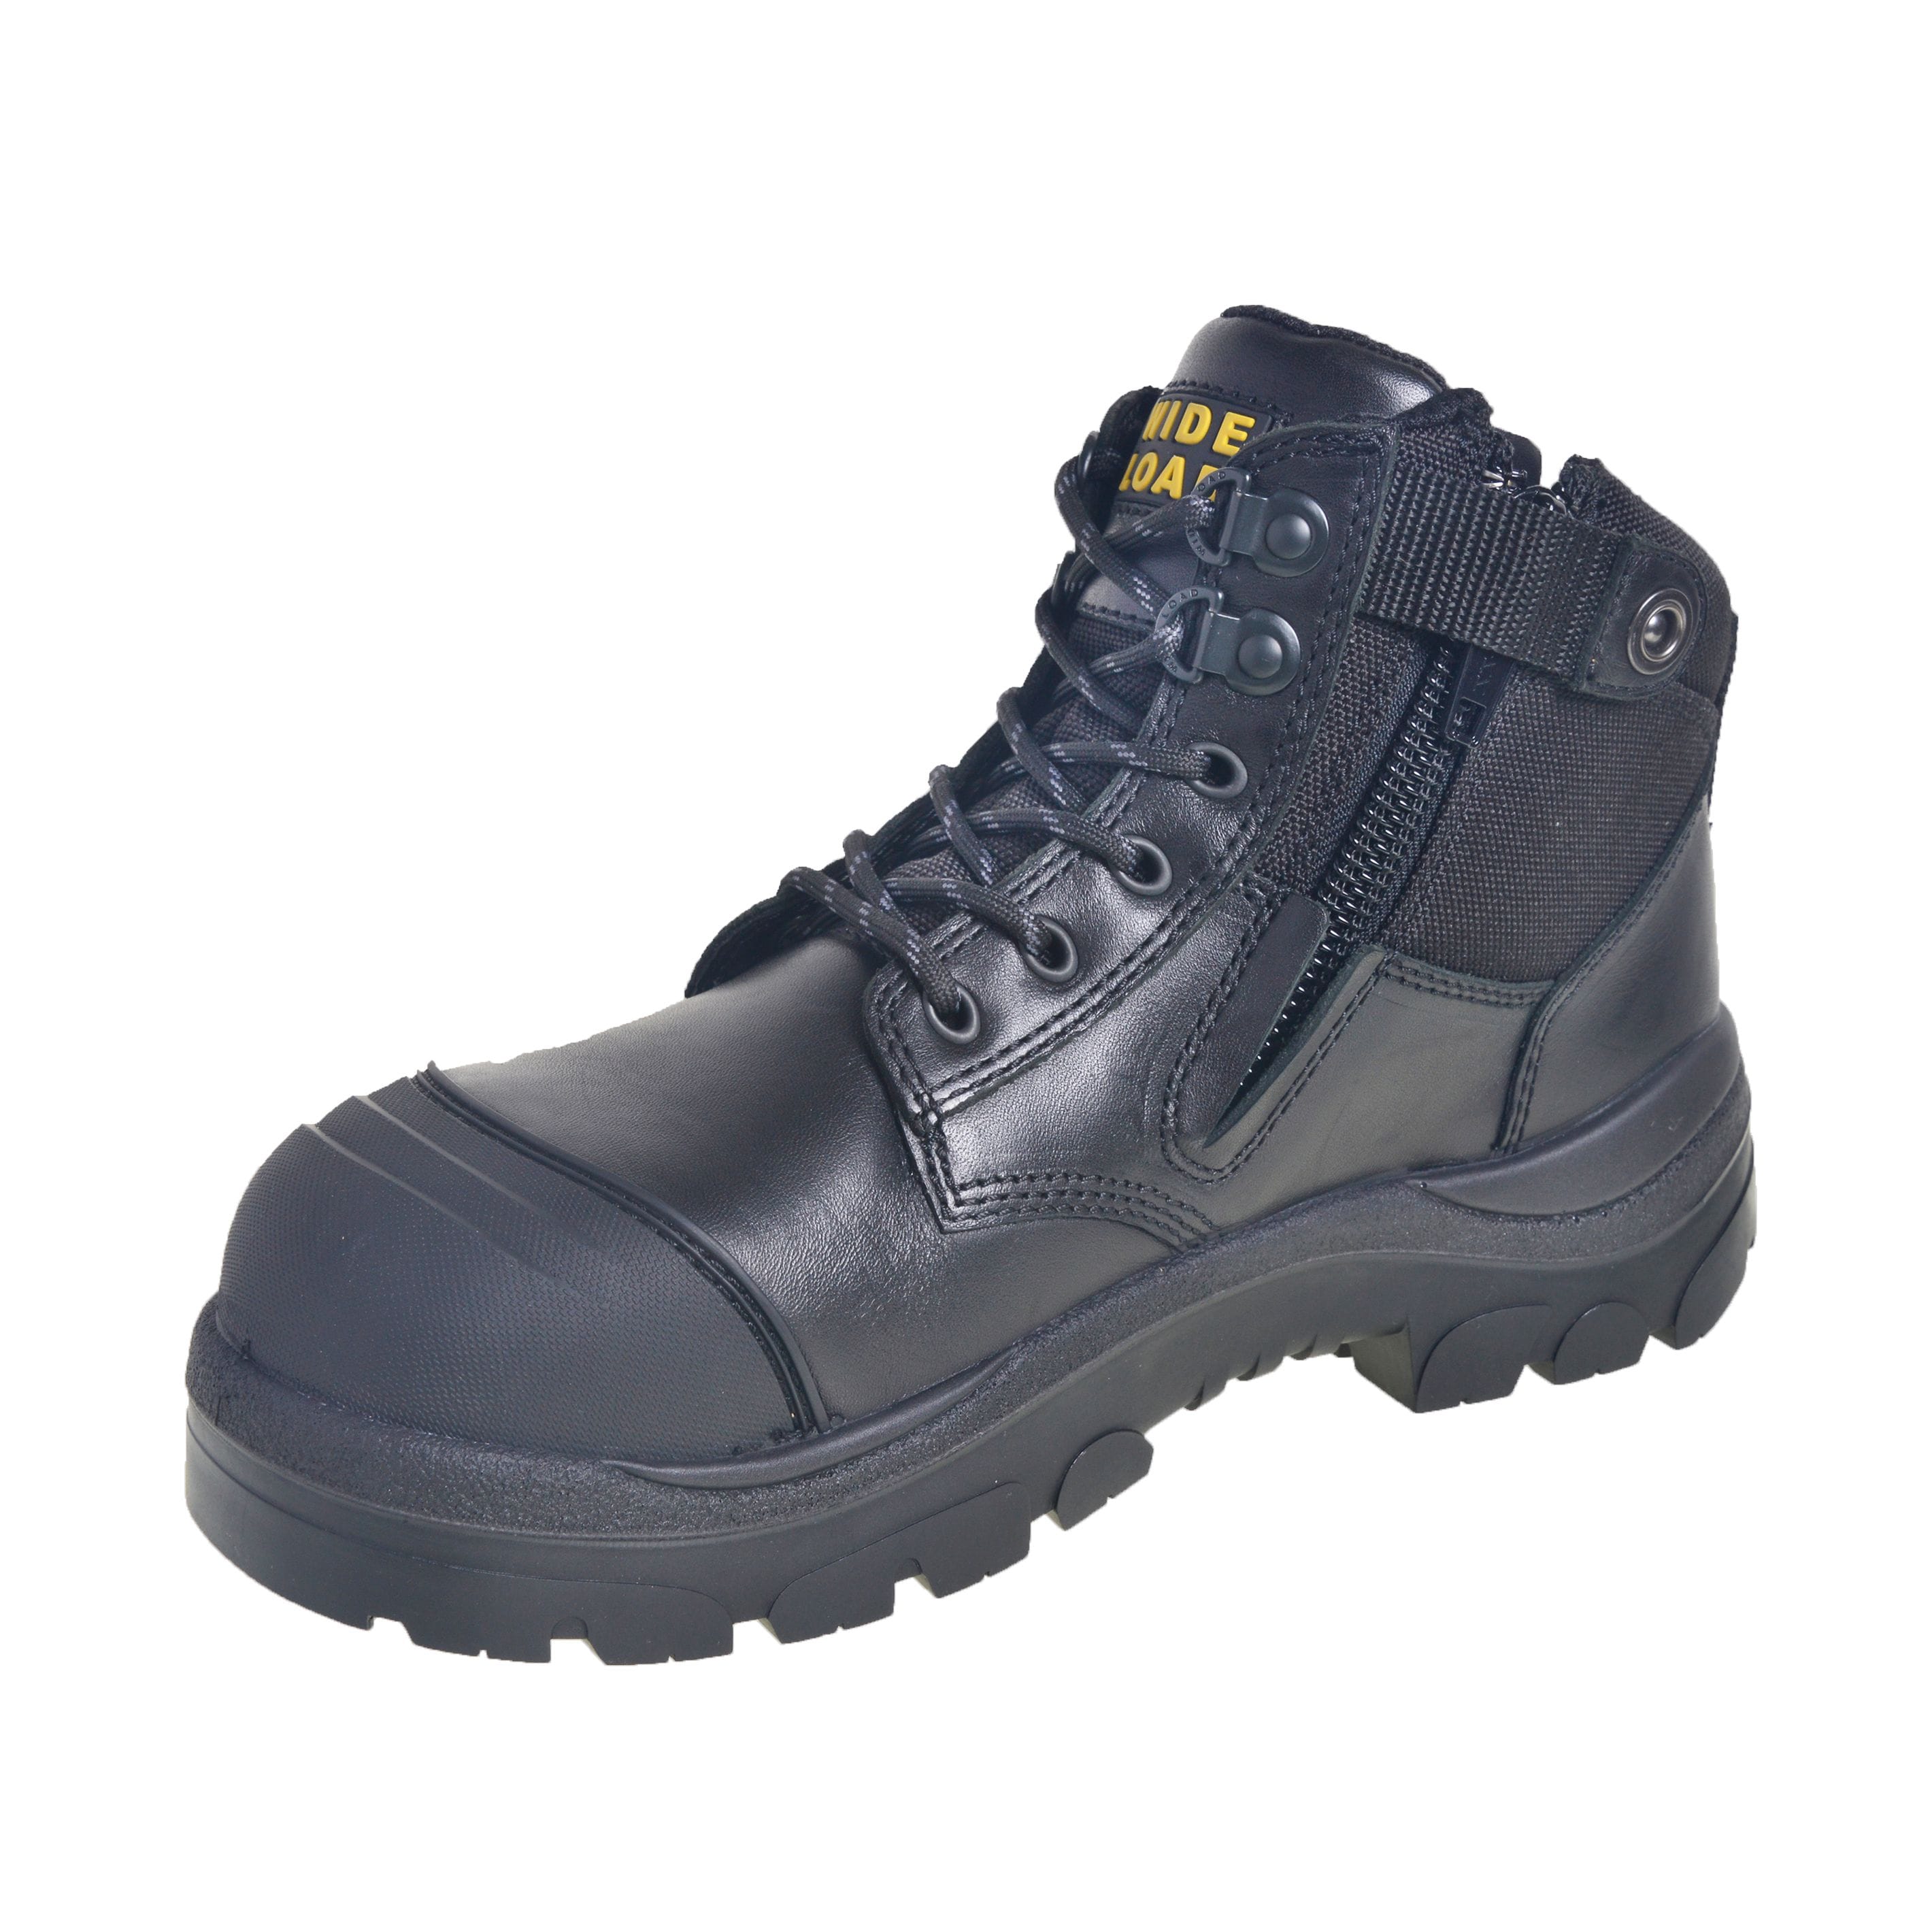 extra wide work boots manufacturers